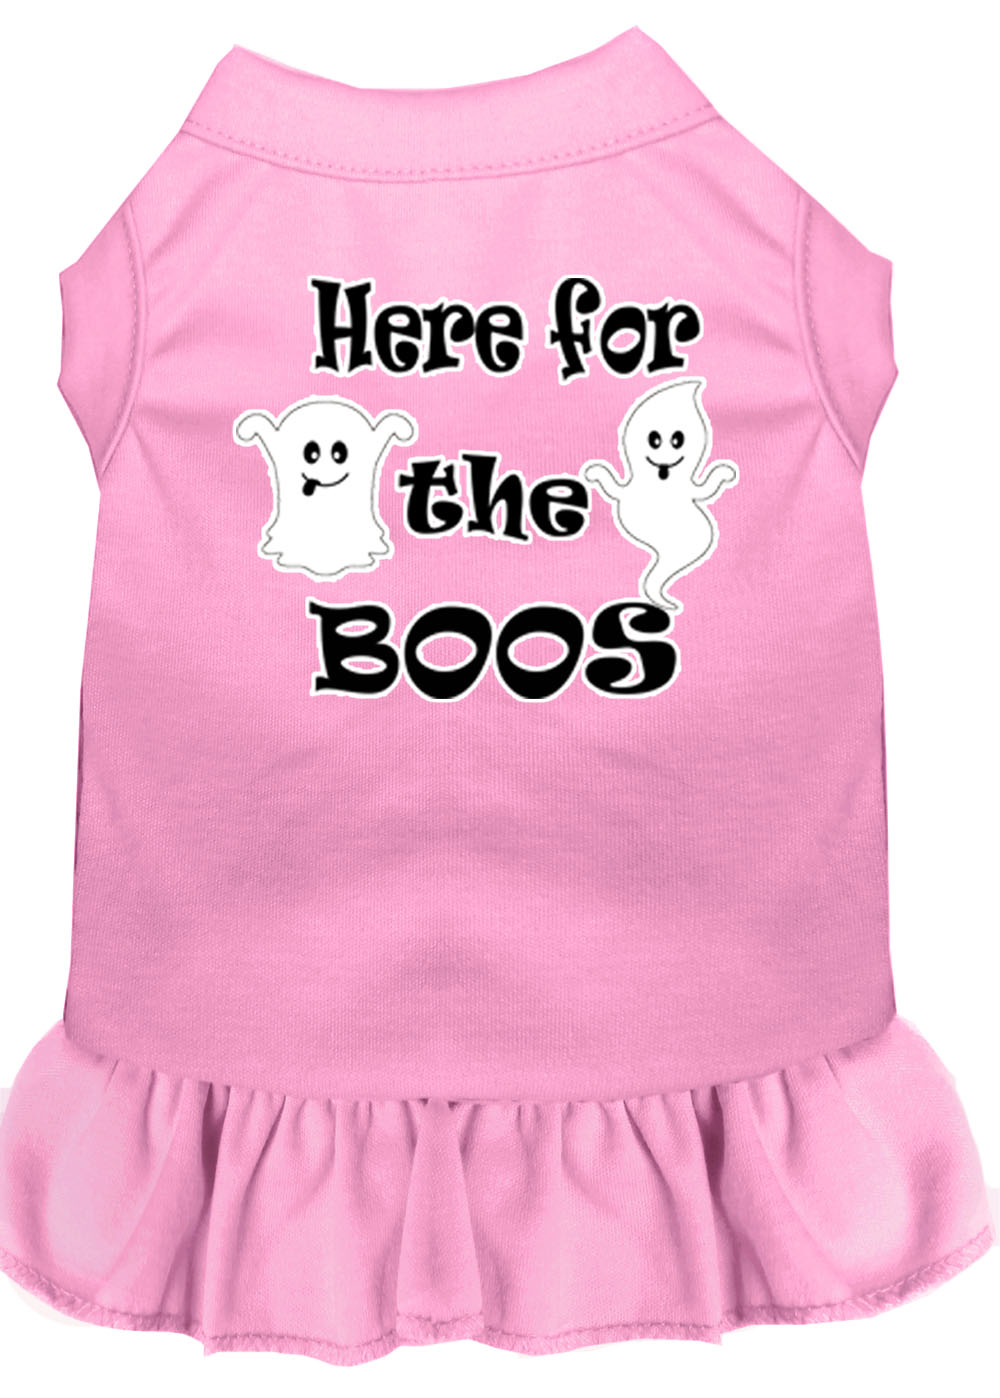 Here for the Boos Screen Print Dog Dress Light Pink XL